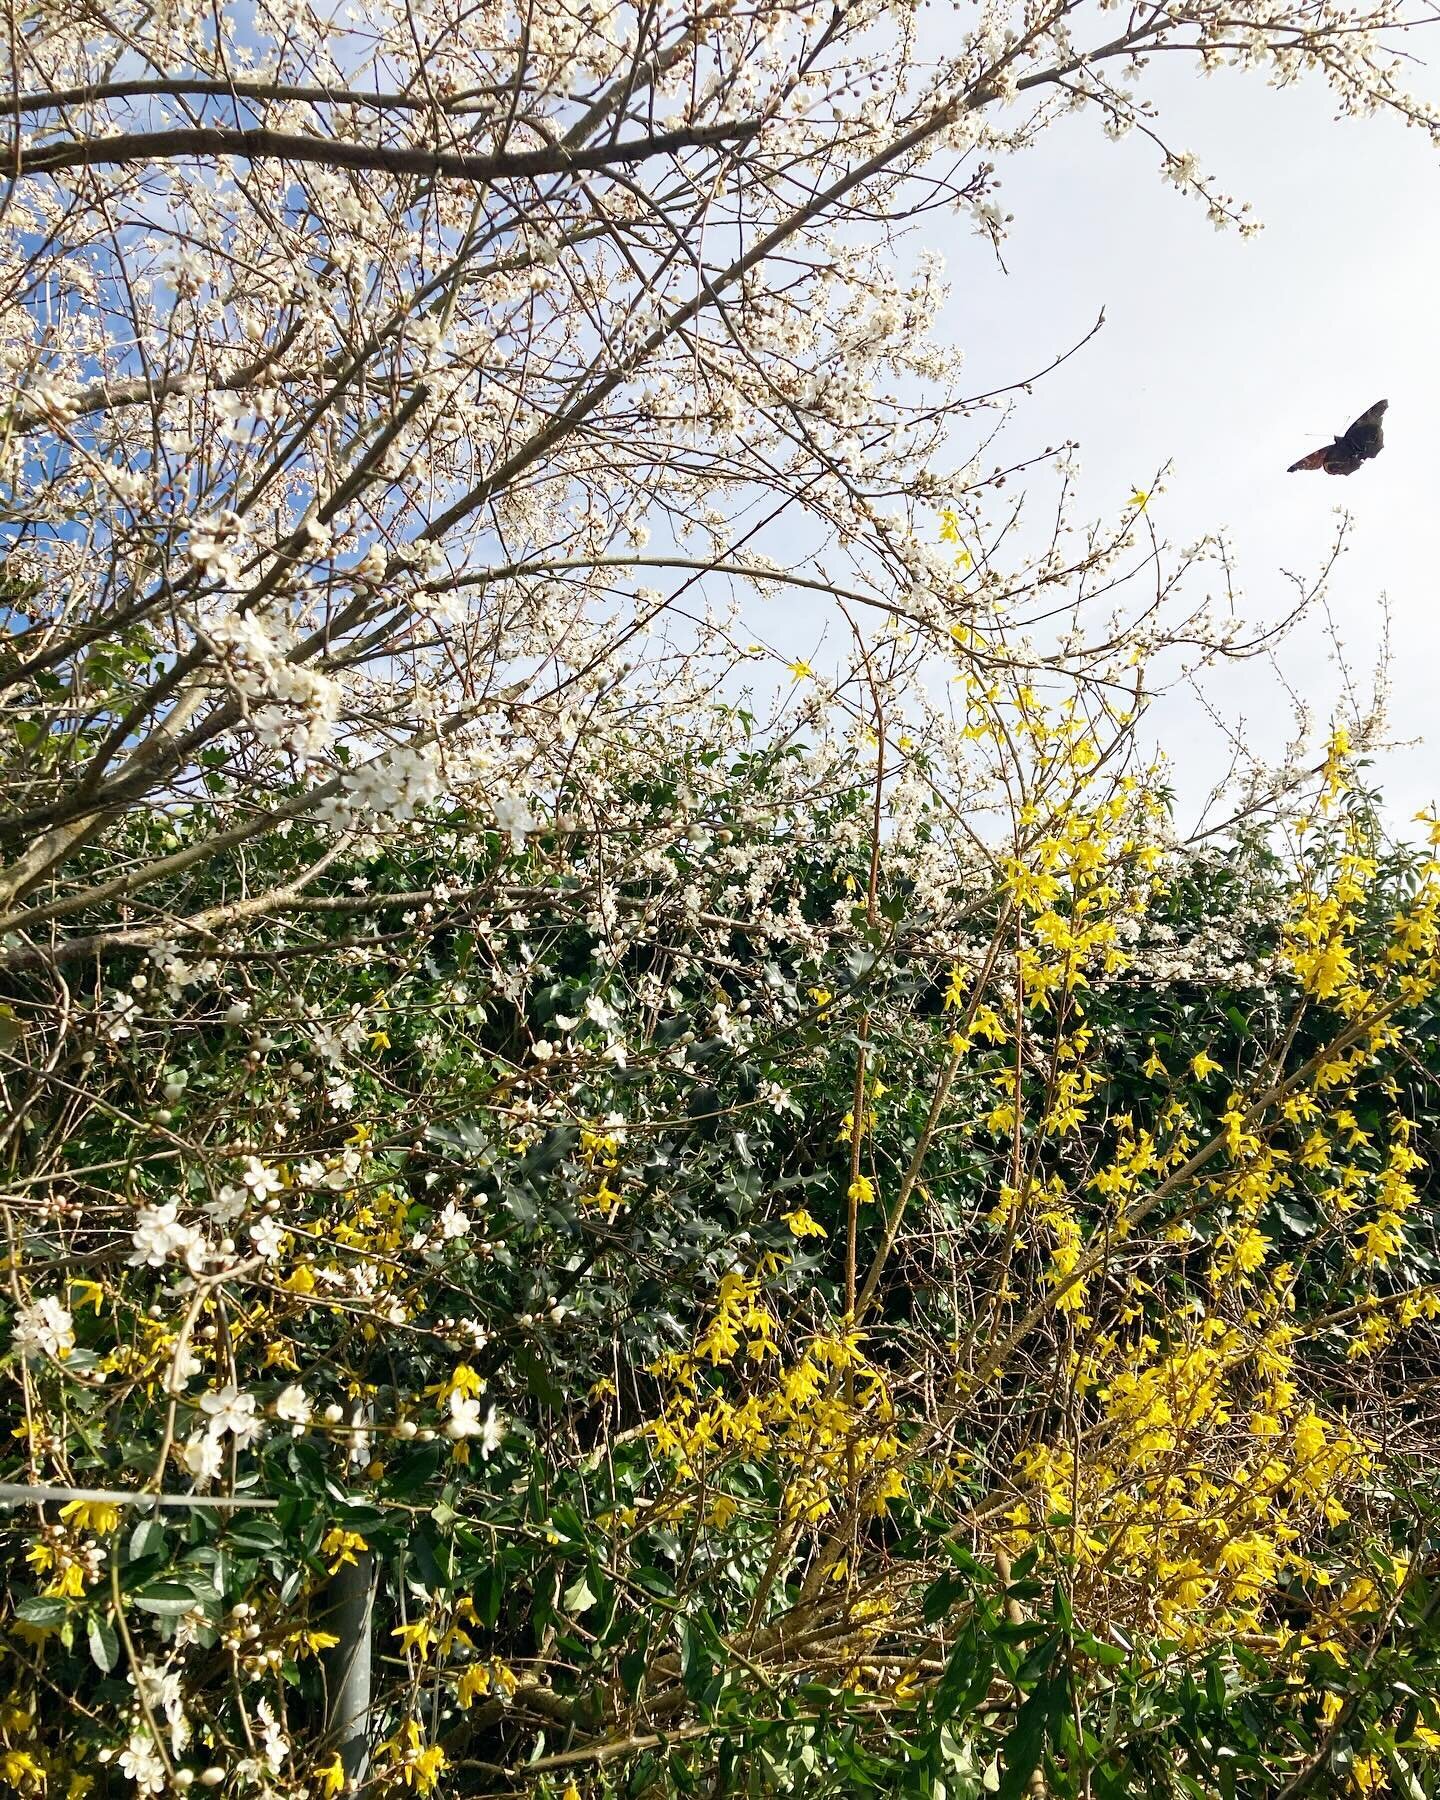 First butterflies, the vivid forsythia and that fine, dry snow of honeyed plum blossom when the wind rises. 🌀 

Our little March book of writings is live now at The Clearing filled with musings, recipes, gratitude and spring celebration even from wi